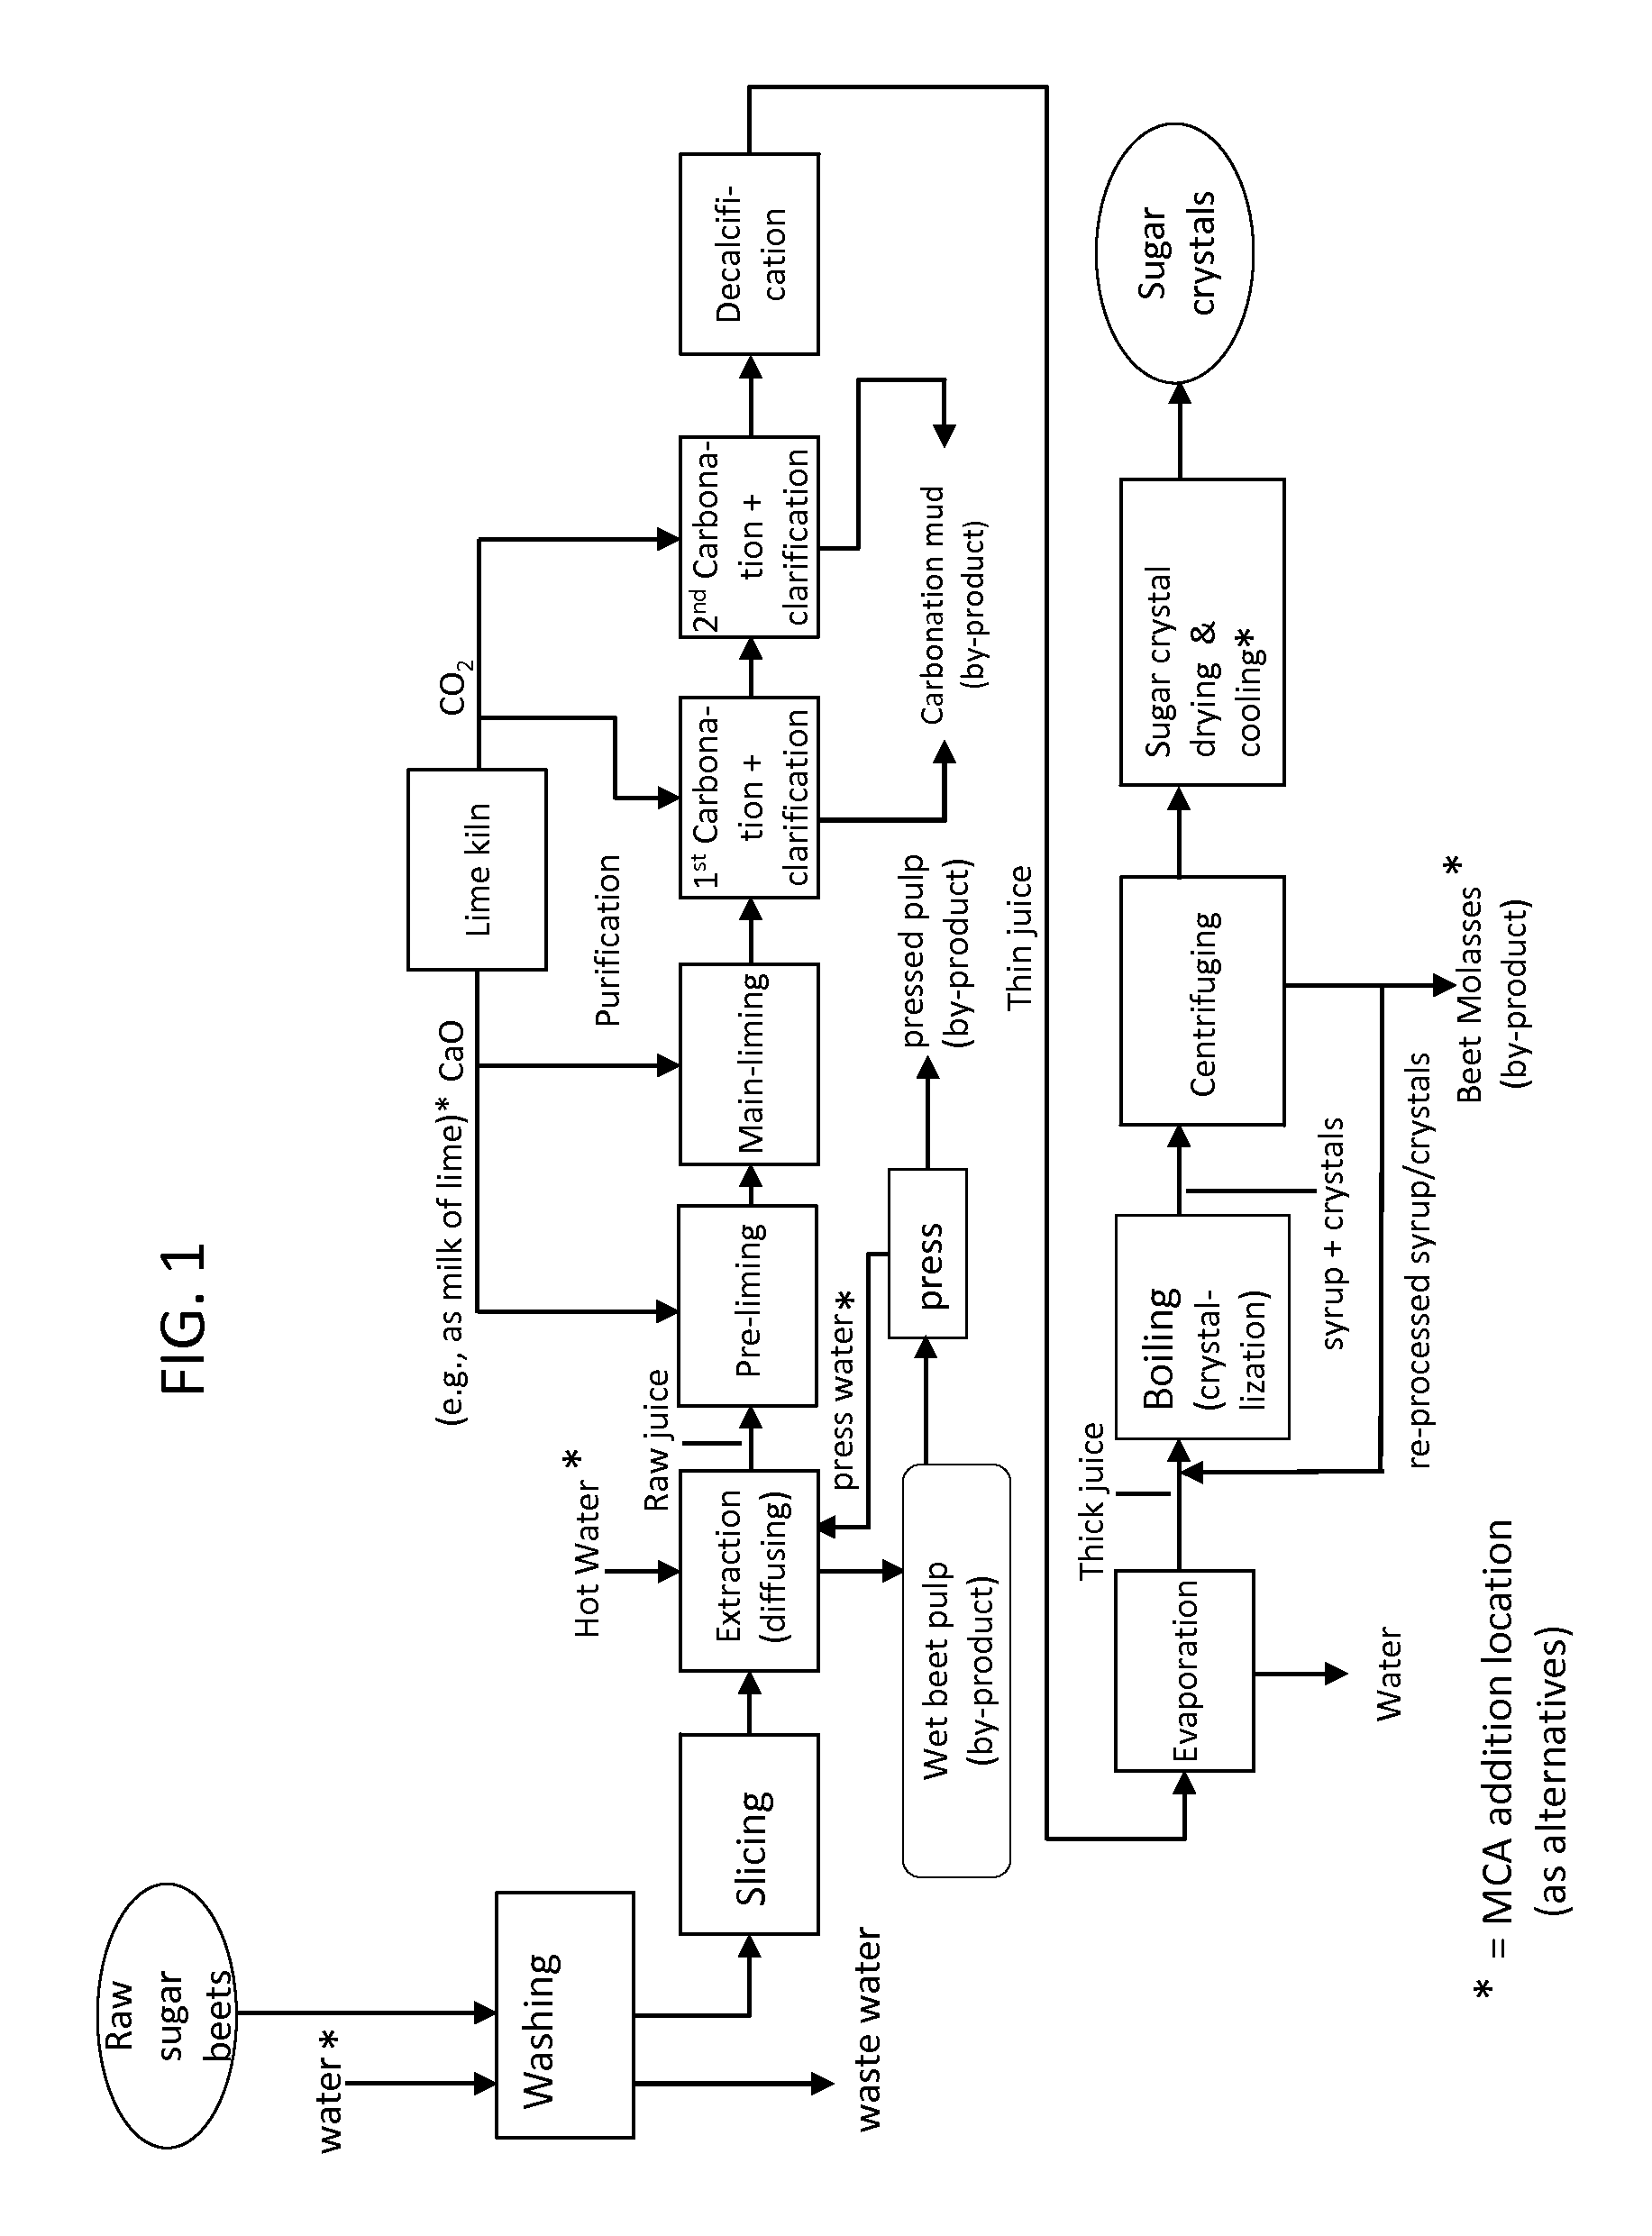 Methods of microbiological control in beet sugar and other sugar-containing plant material processing